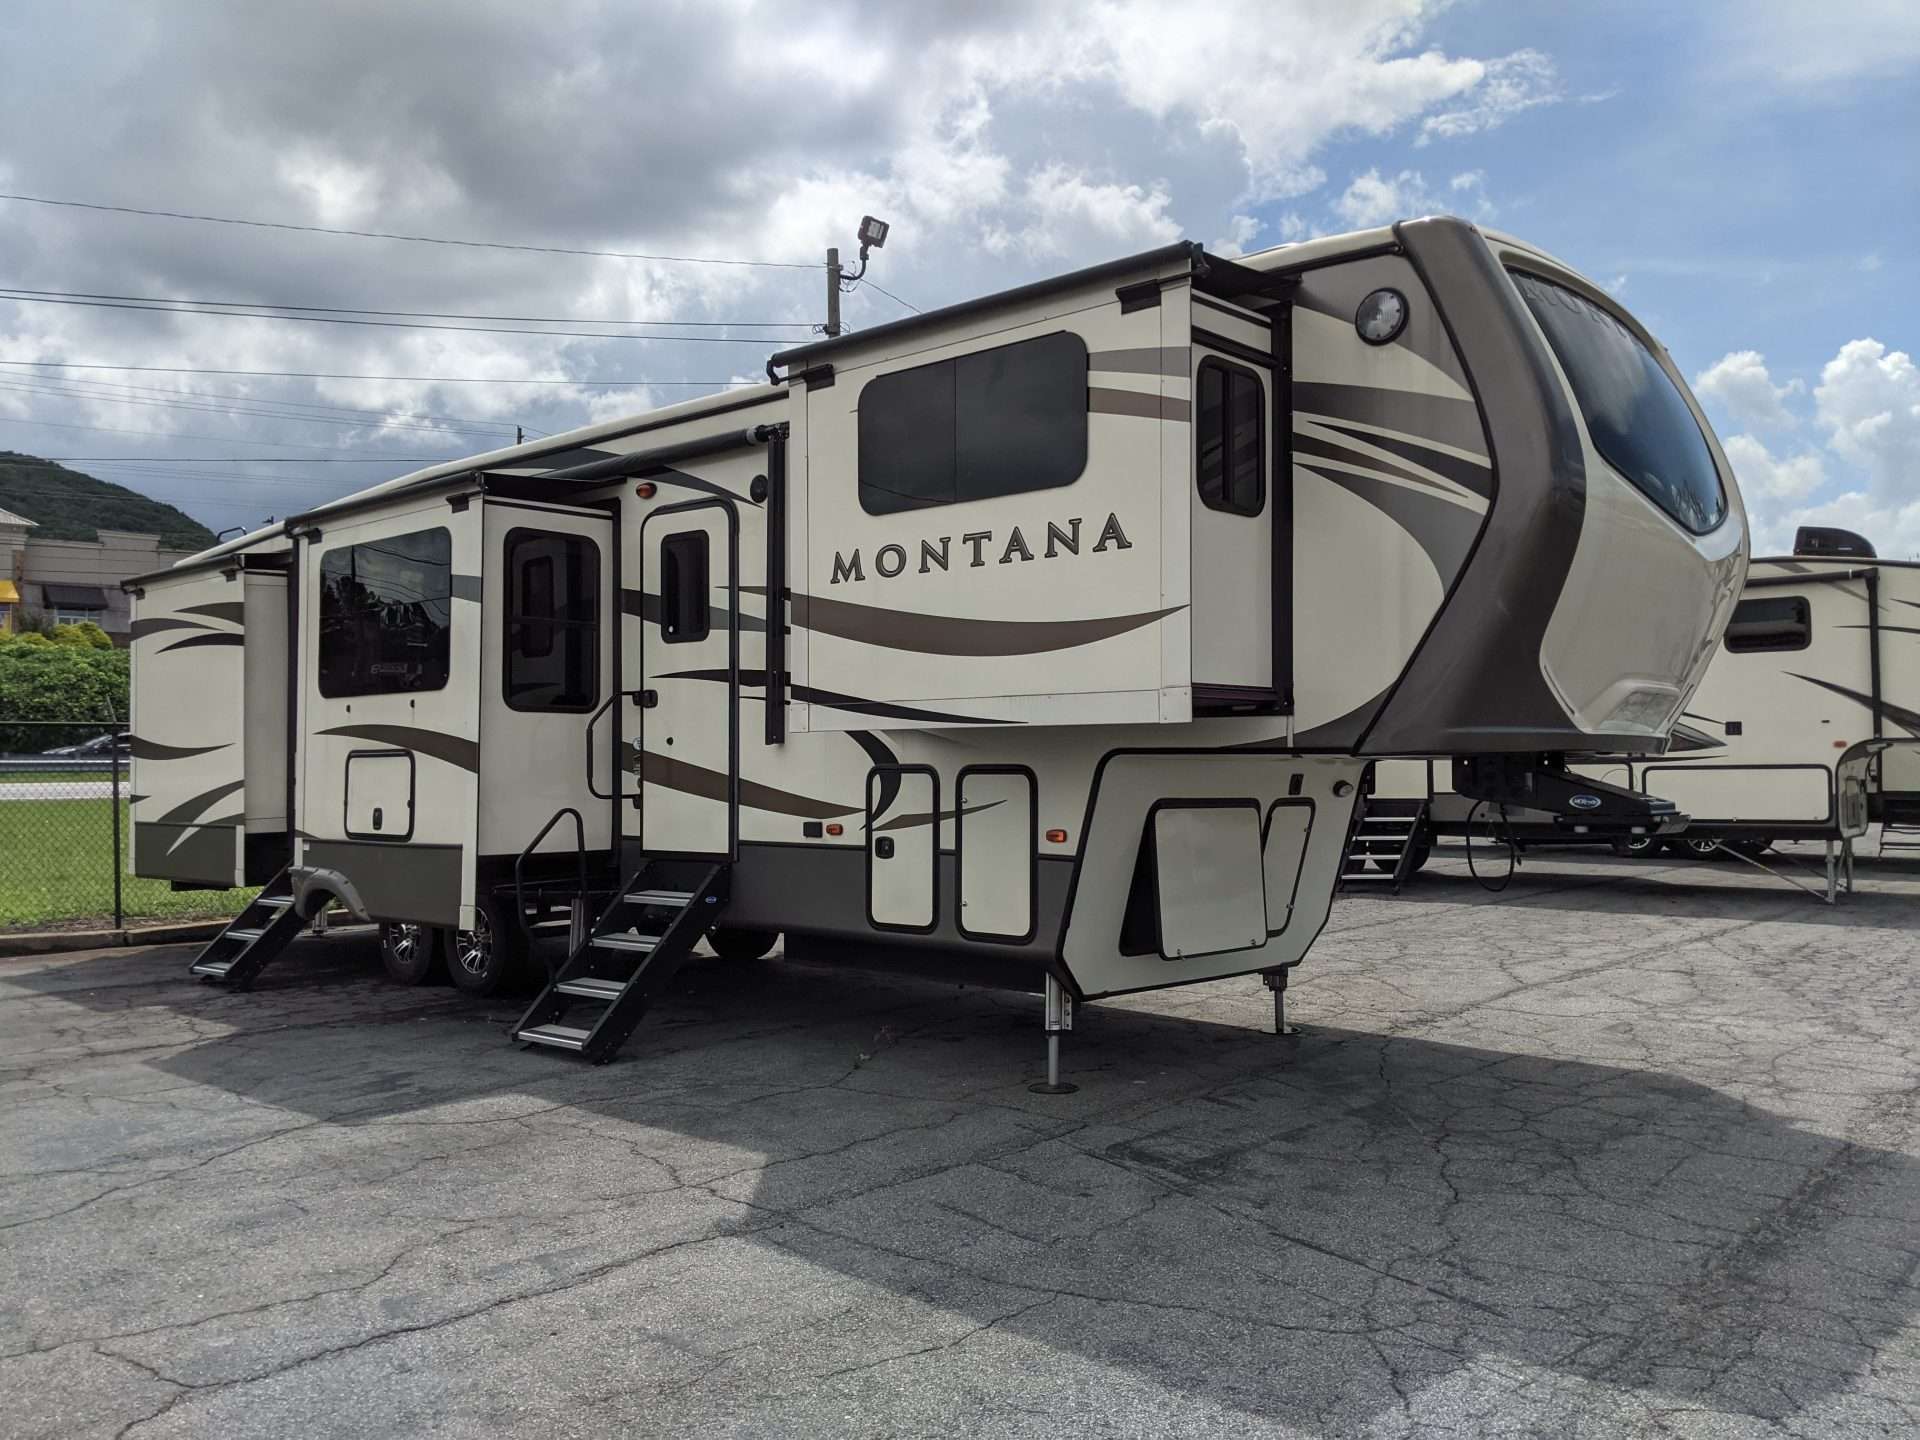 Montana 5th wheel parked in parking lot.